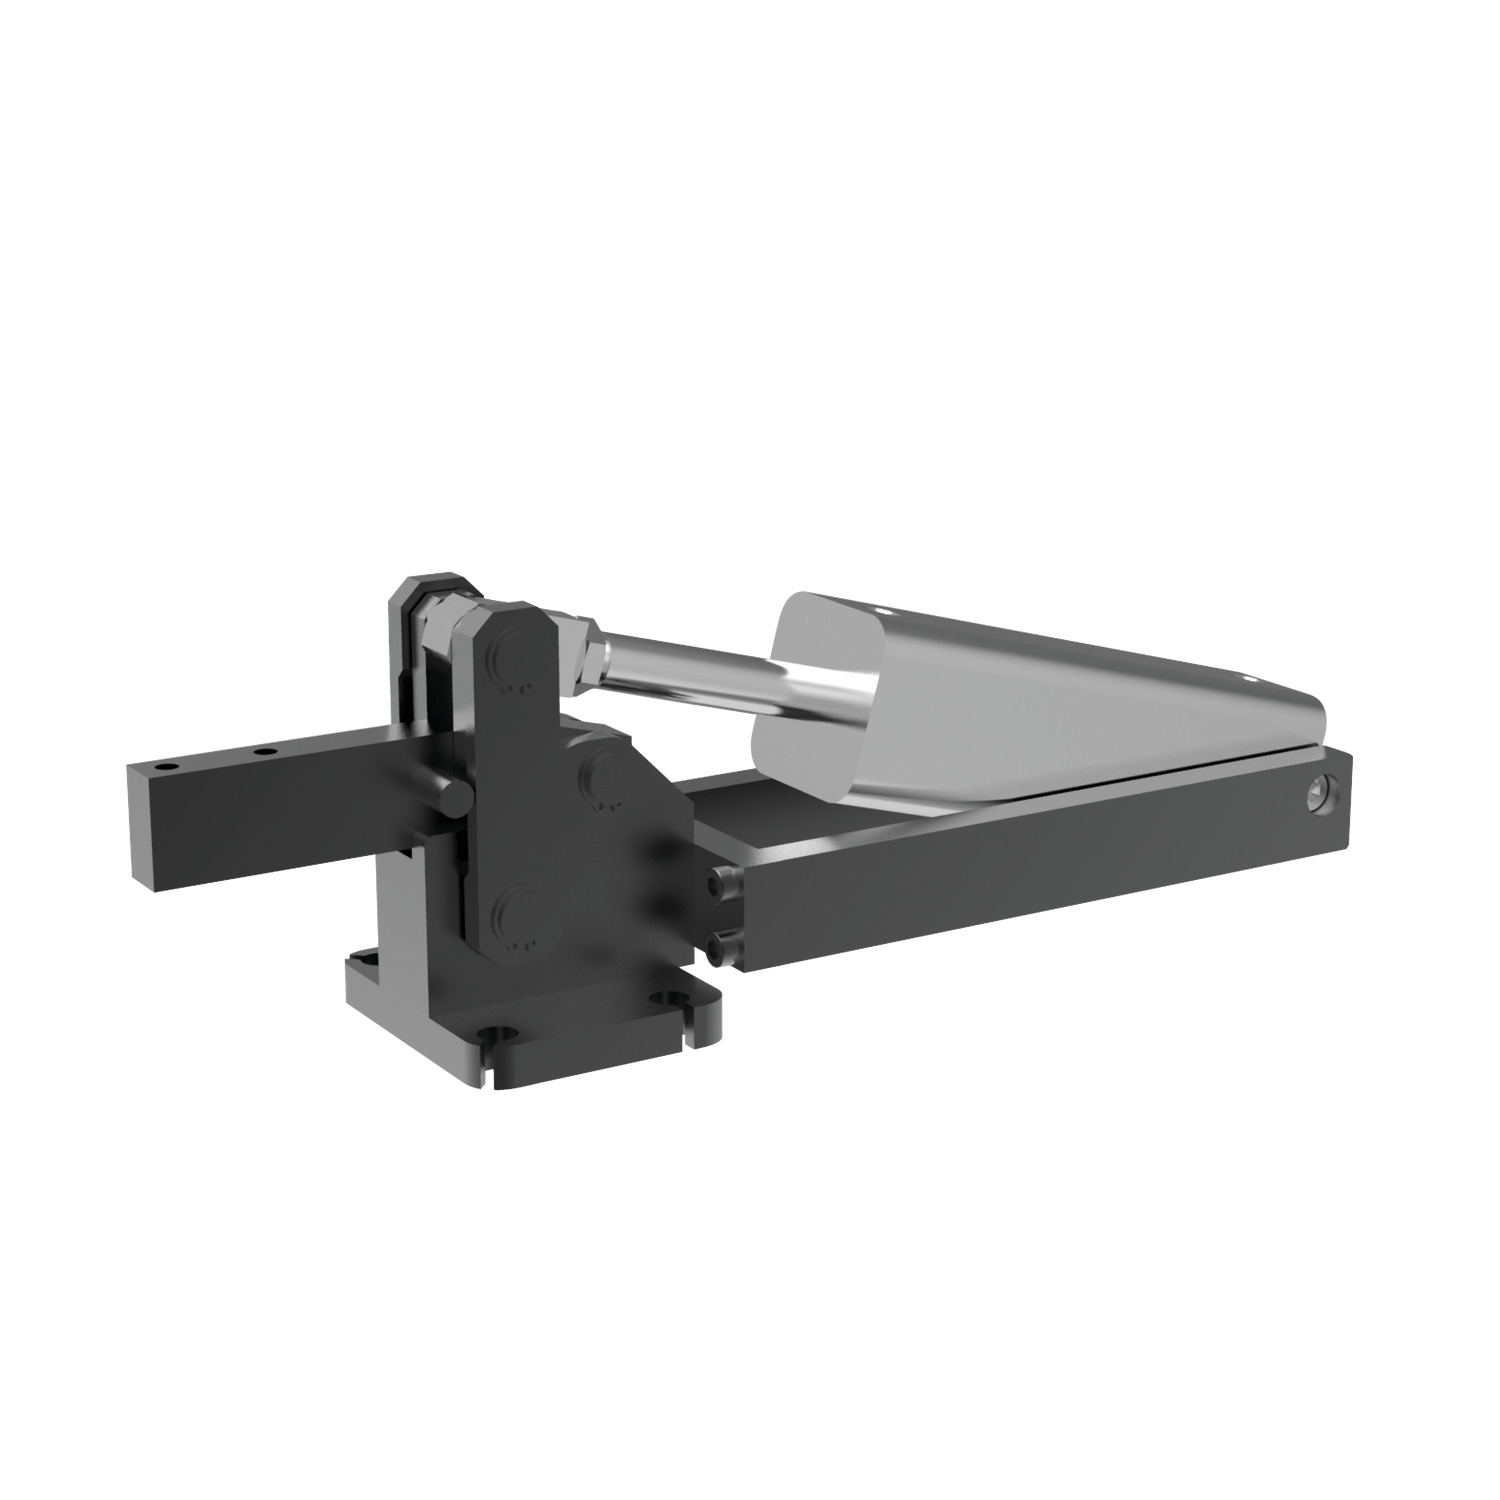 Heavy Duty Pneumatic Toggle Clamps Ideal for installation in material handling lines and special purpose machines. Opening and closing of clamp can be controlled electronically.